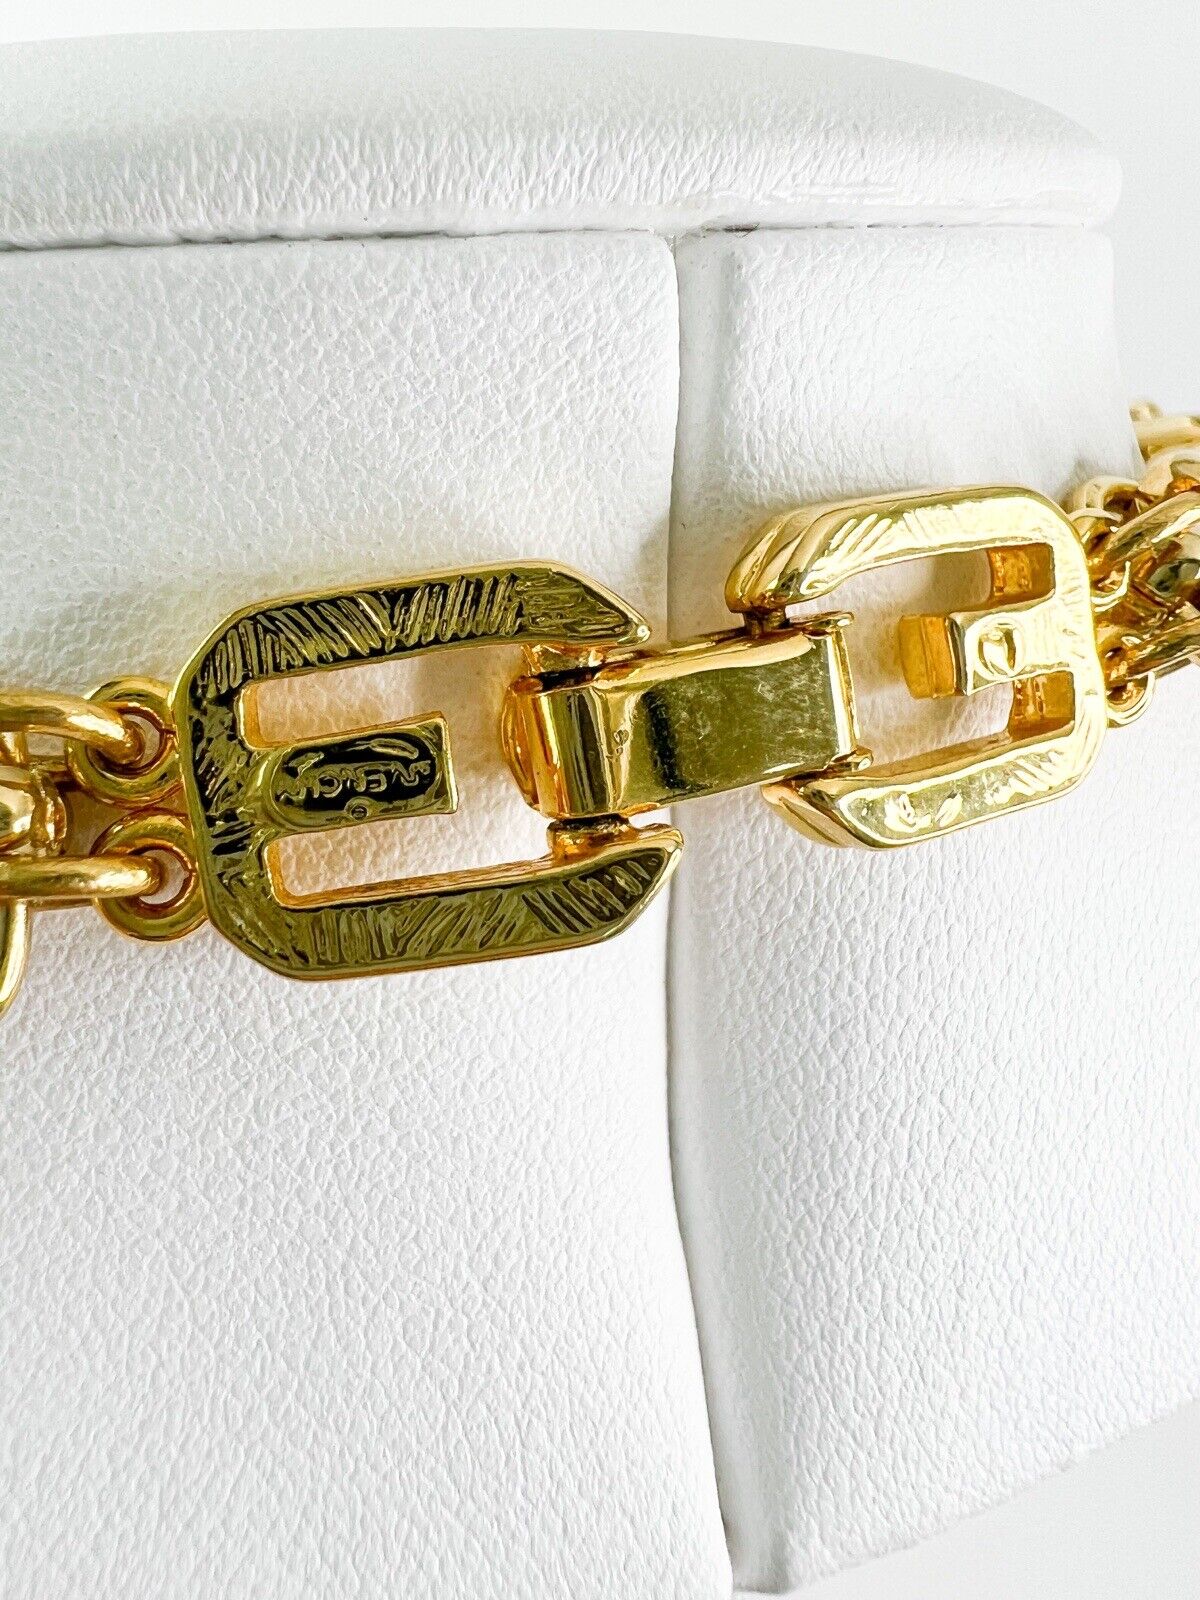 Vintage Givenchy Necklace, Vintage Necklace, Choker Necklace Gold, Gold Choker Necklace, Gift for her, Jewelry for women